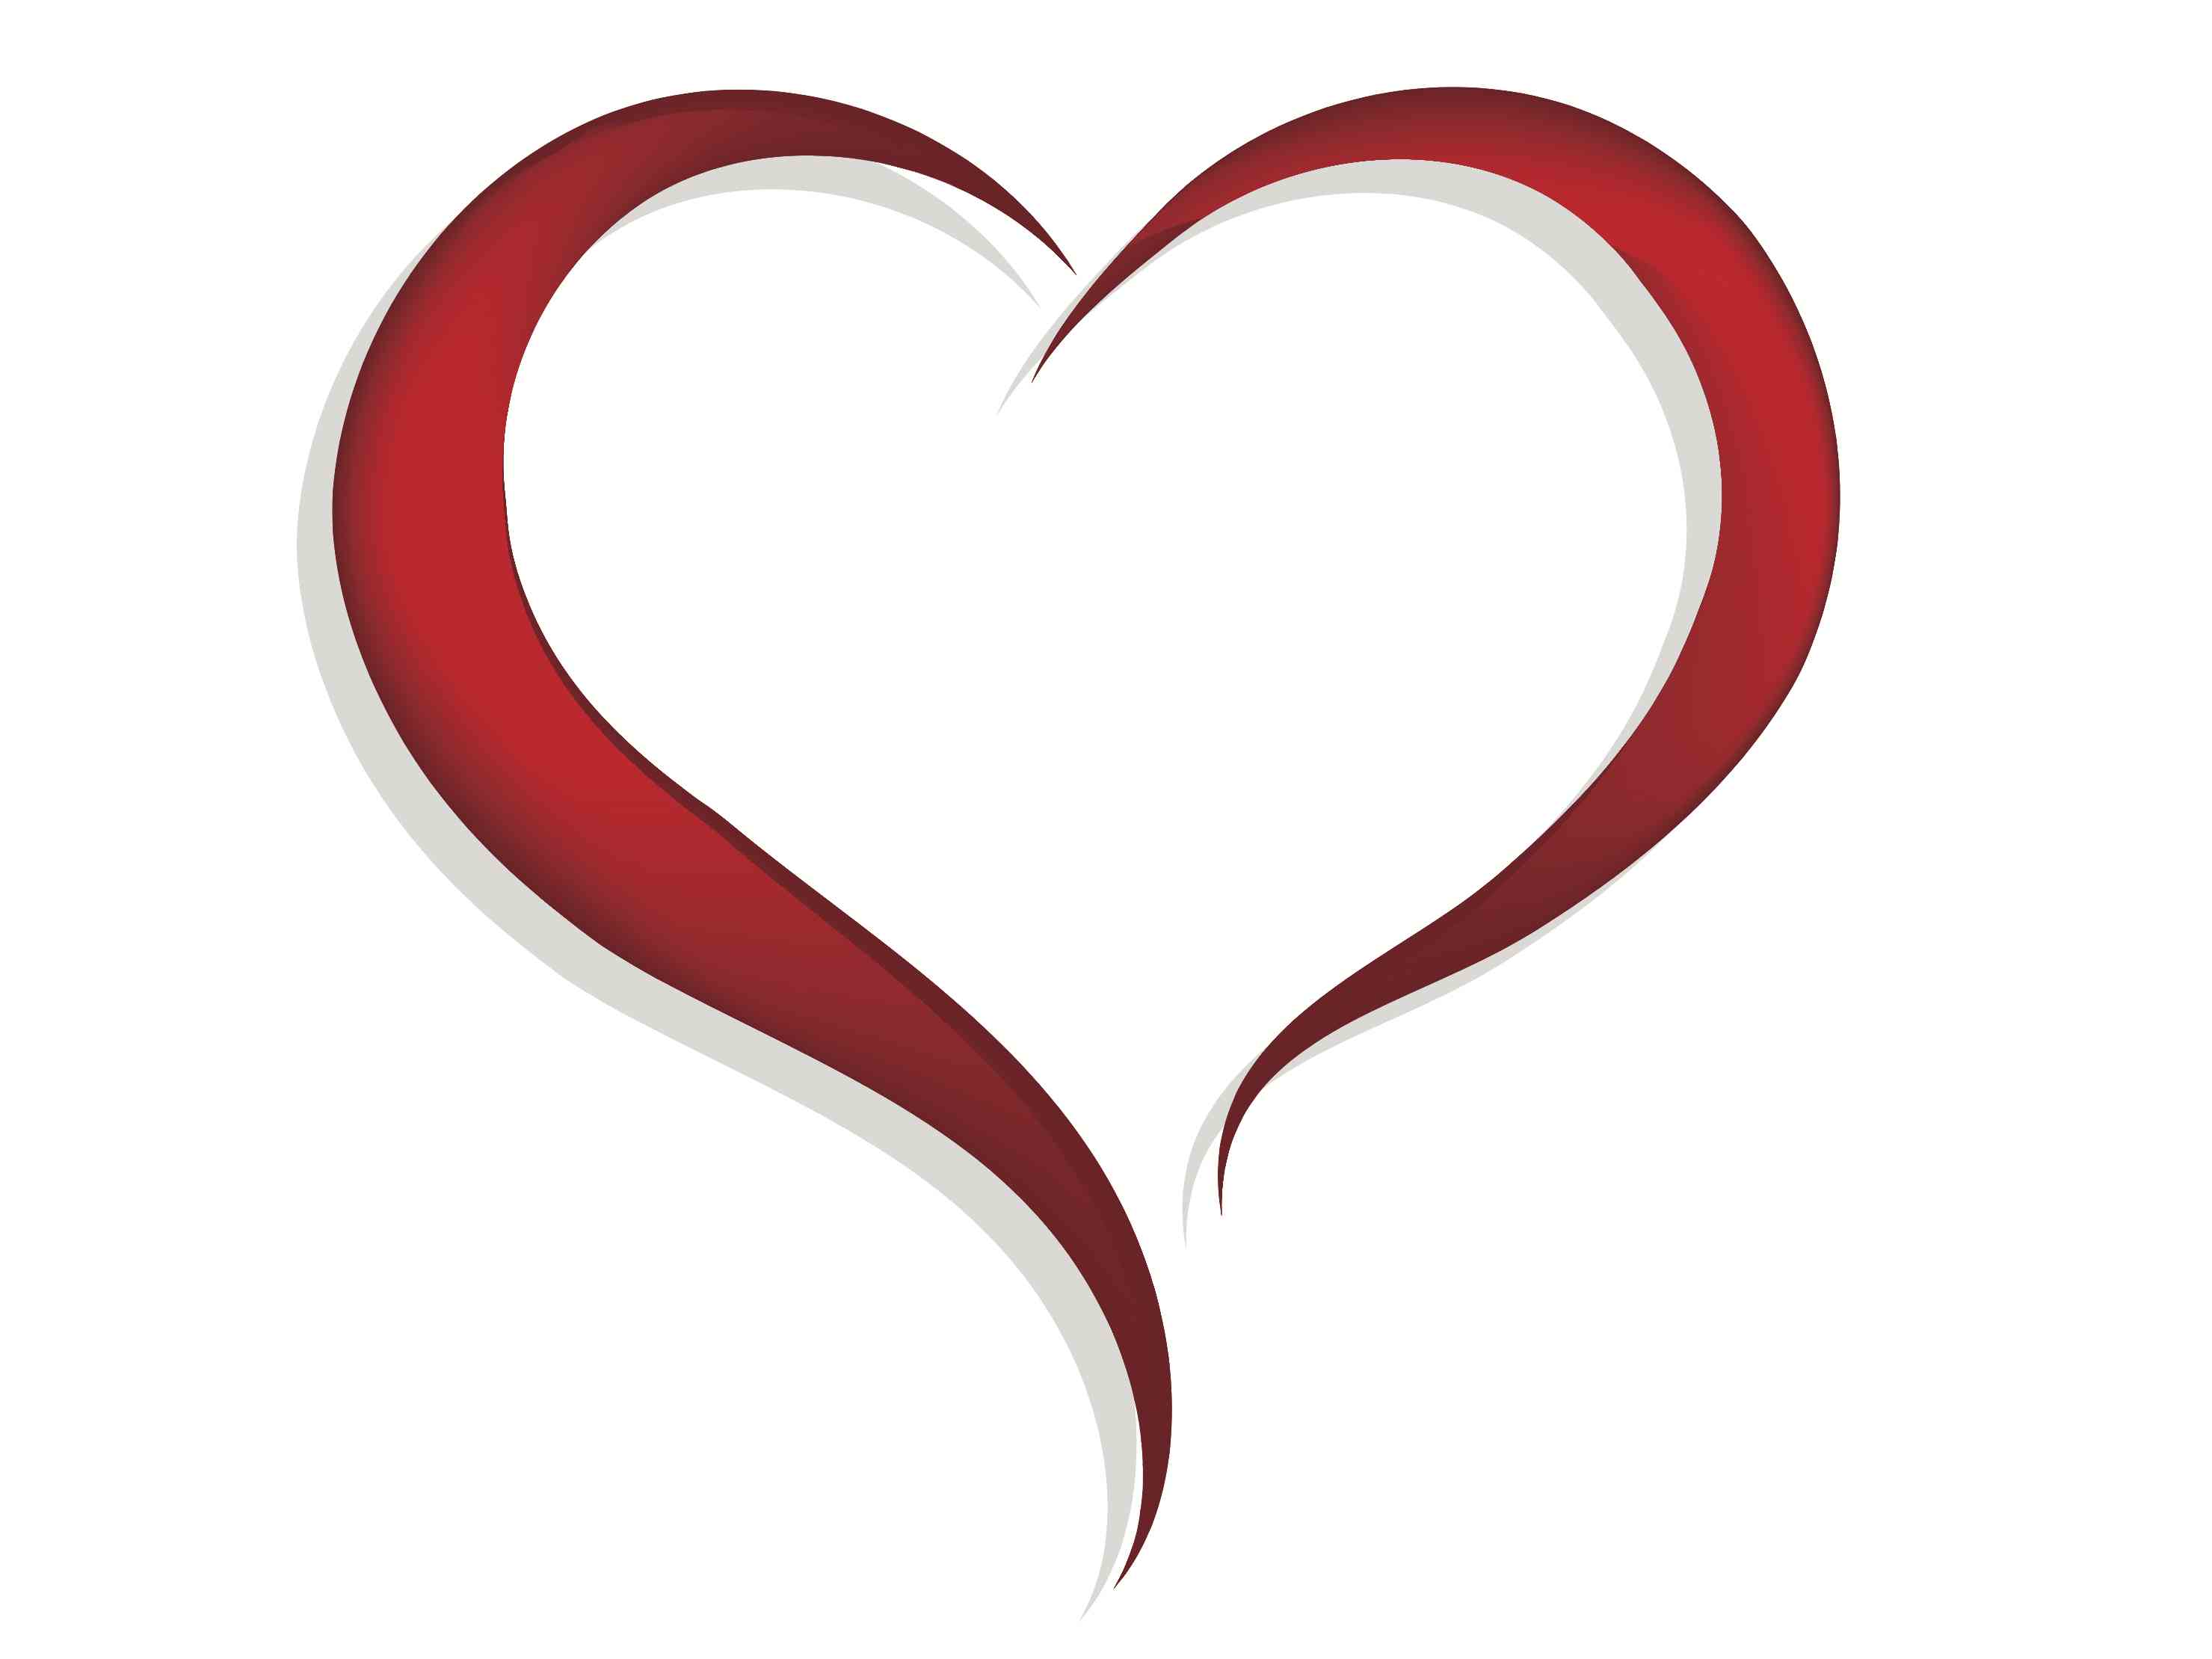 Free Heart Png Images With Transparent Background, Download Free Heart